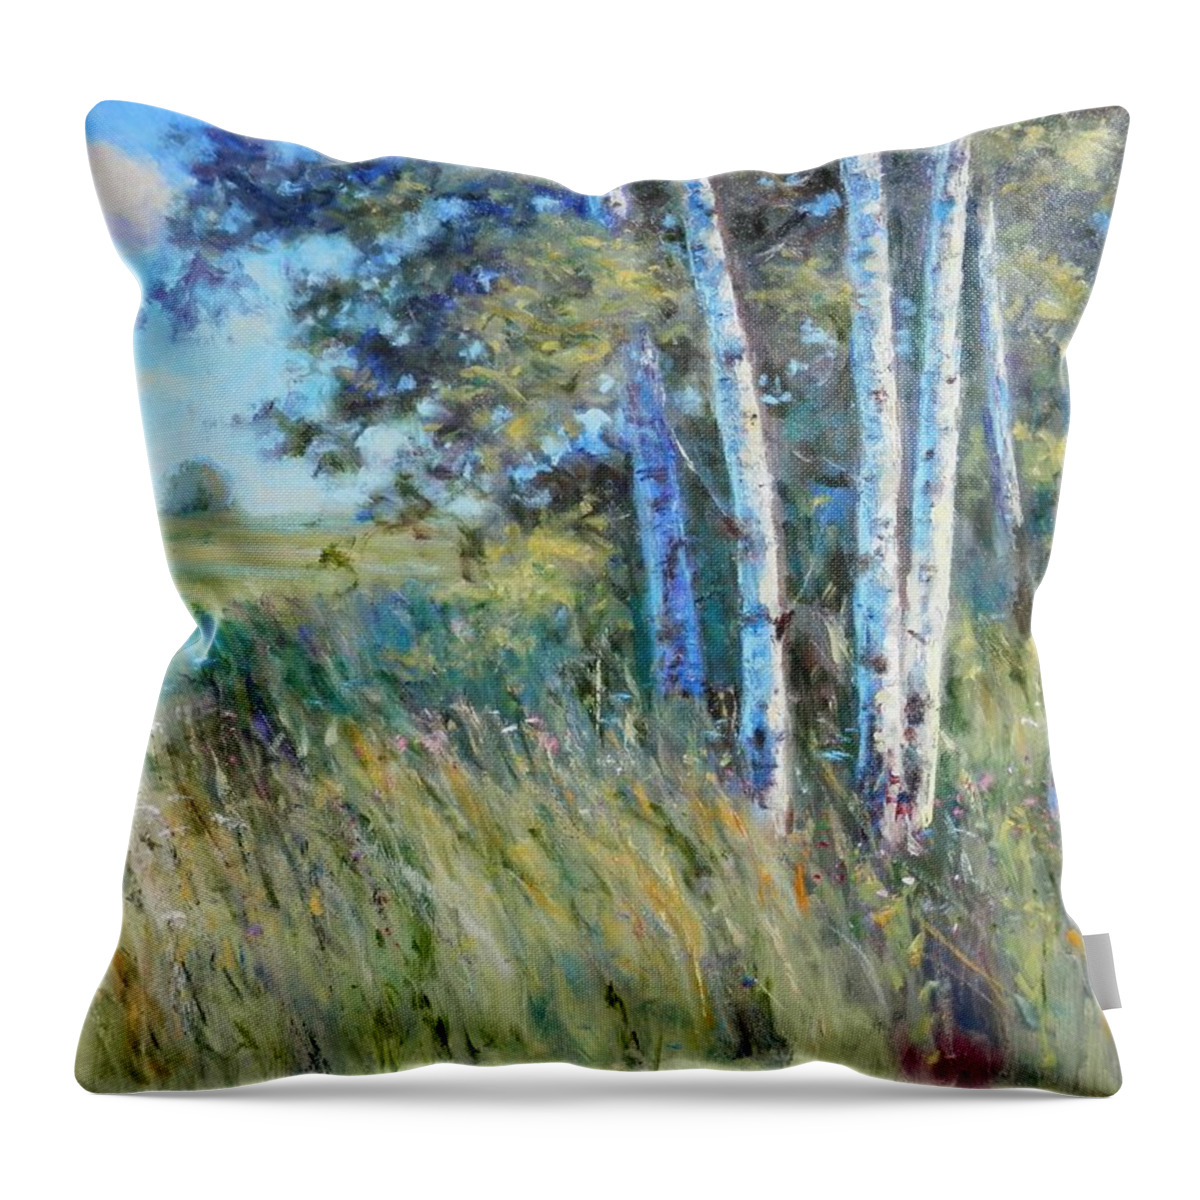 Landscape Throw Pillow featuring the painting Birches by the Roadside by Michael Camp